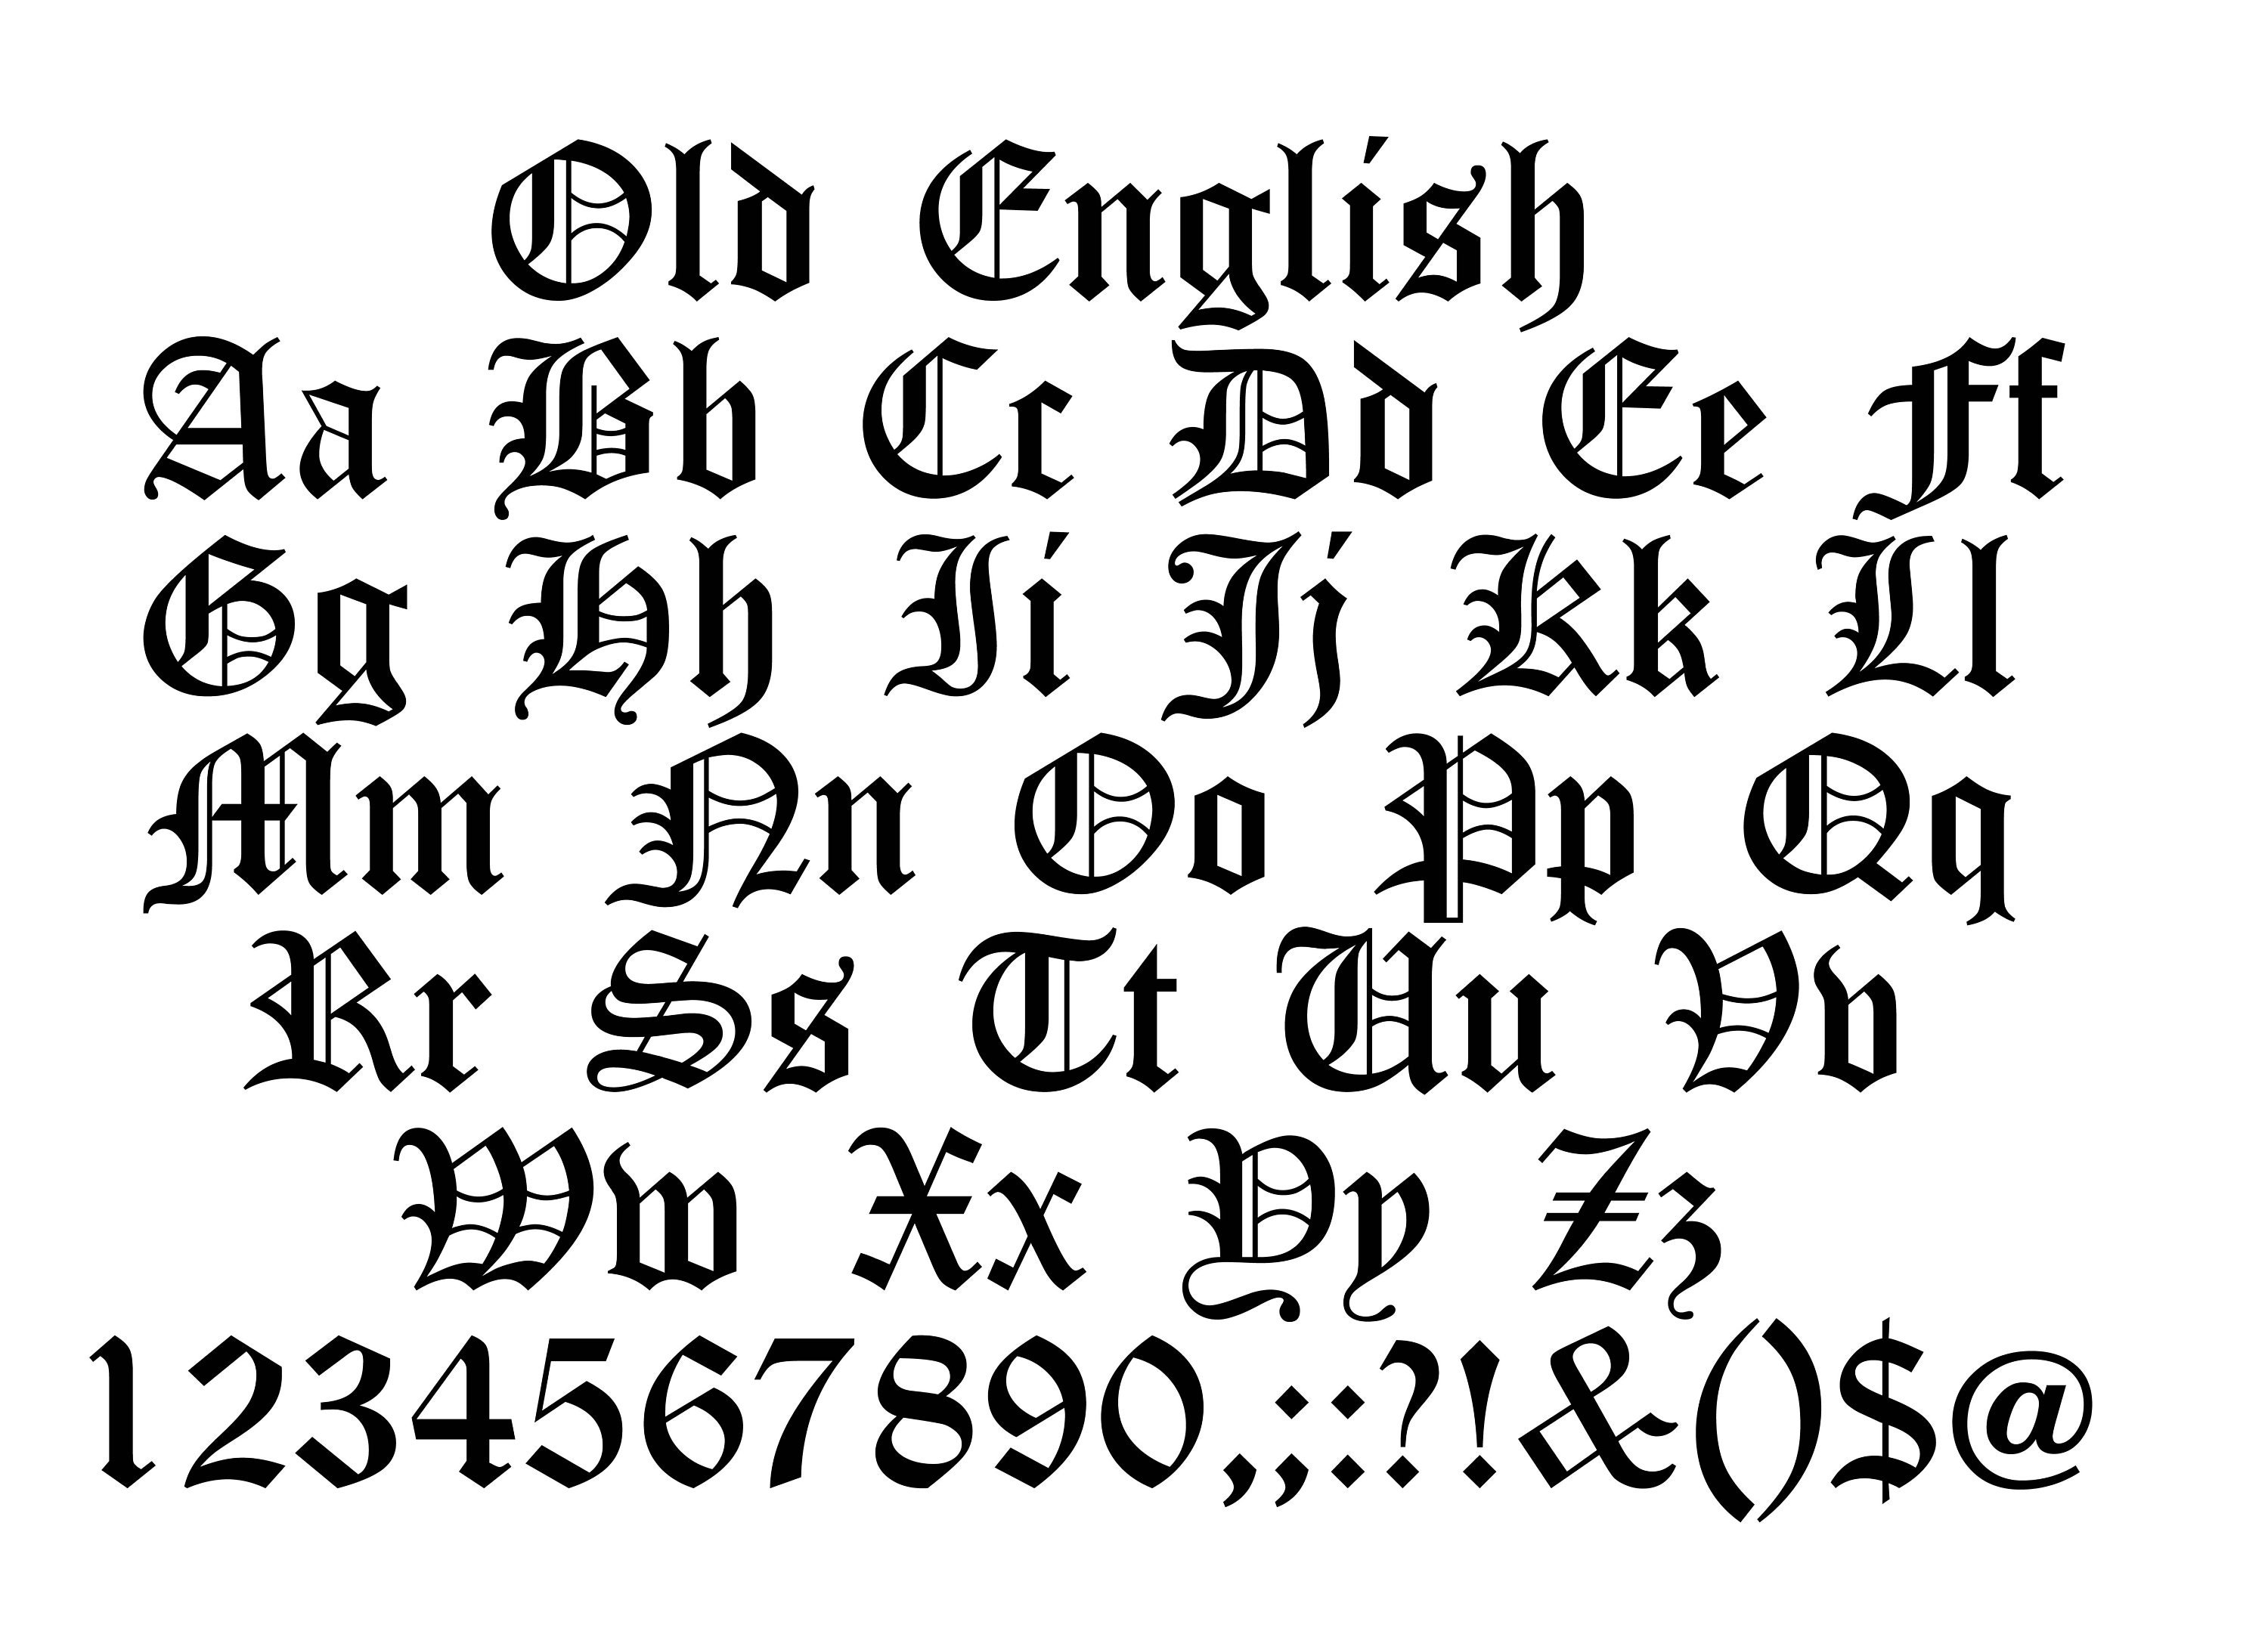 Old English Script Font Free Downloads